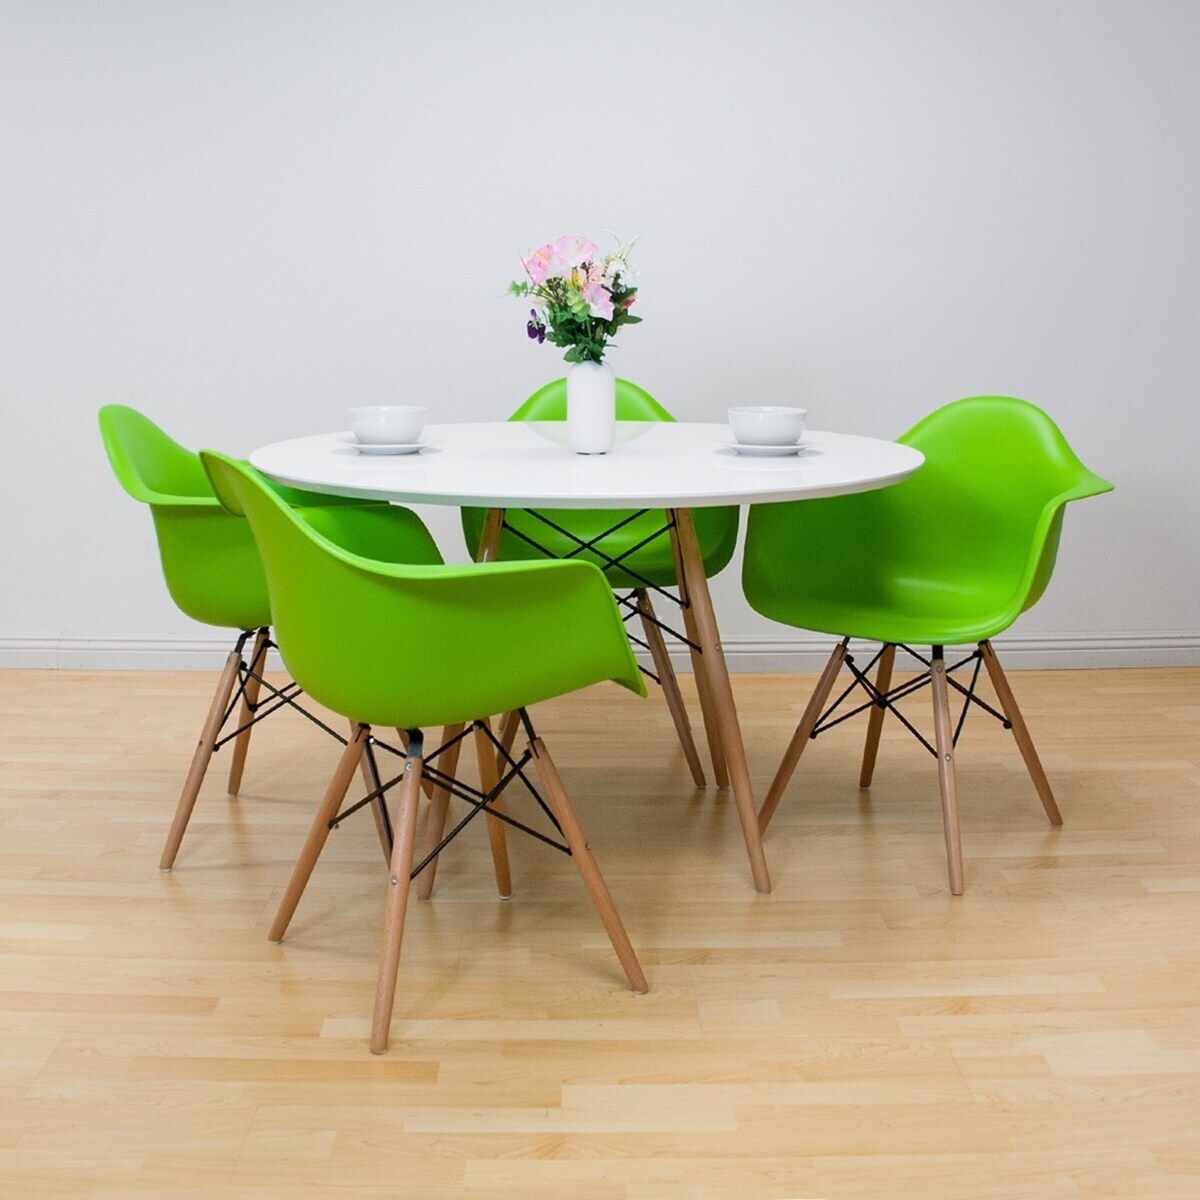 Retro kitchen table with sleek, sophisticated armchair bucket seats